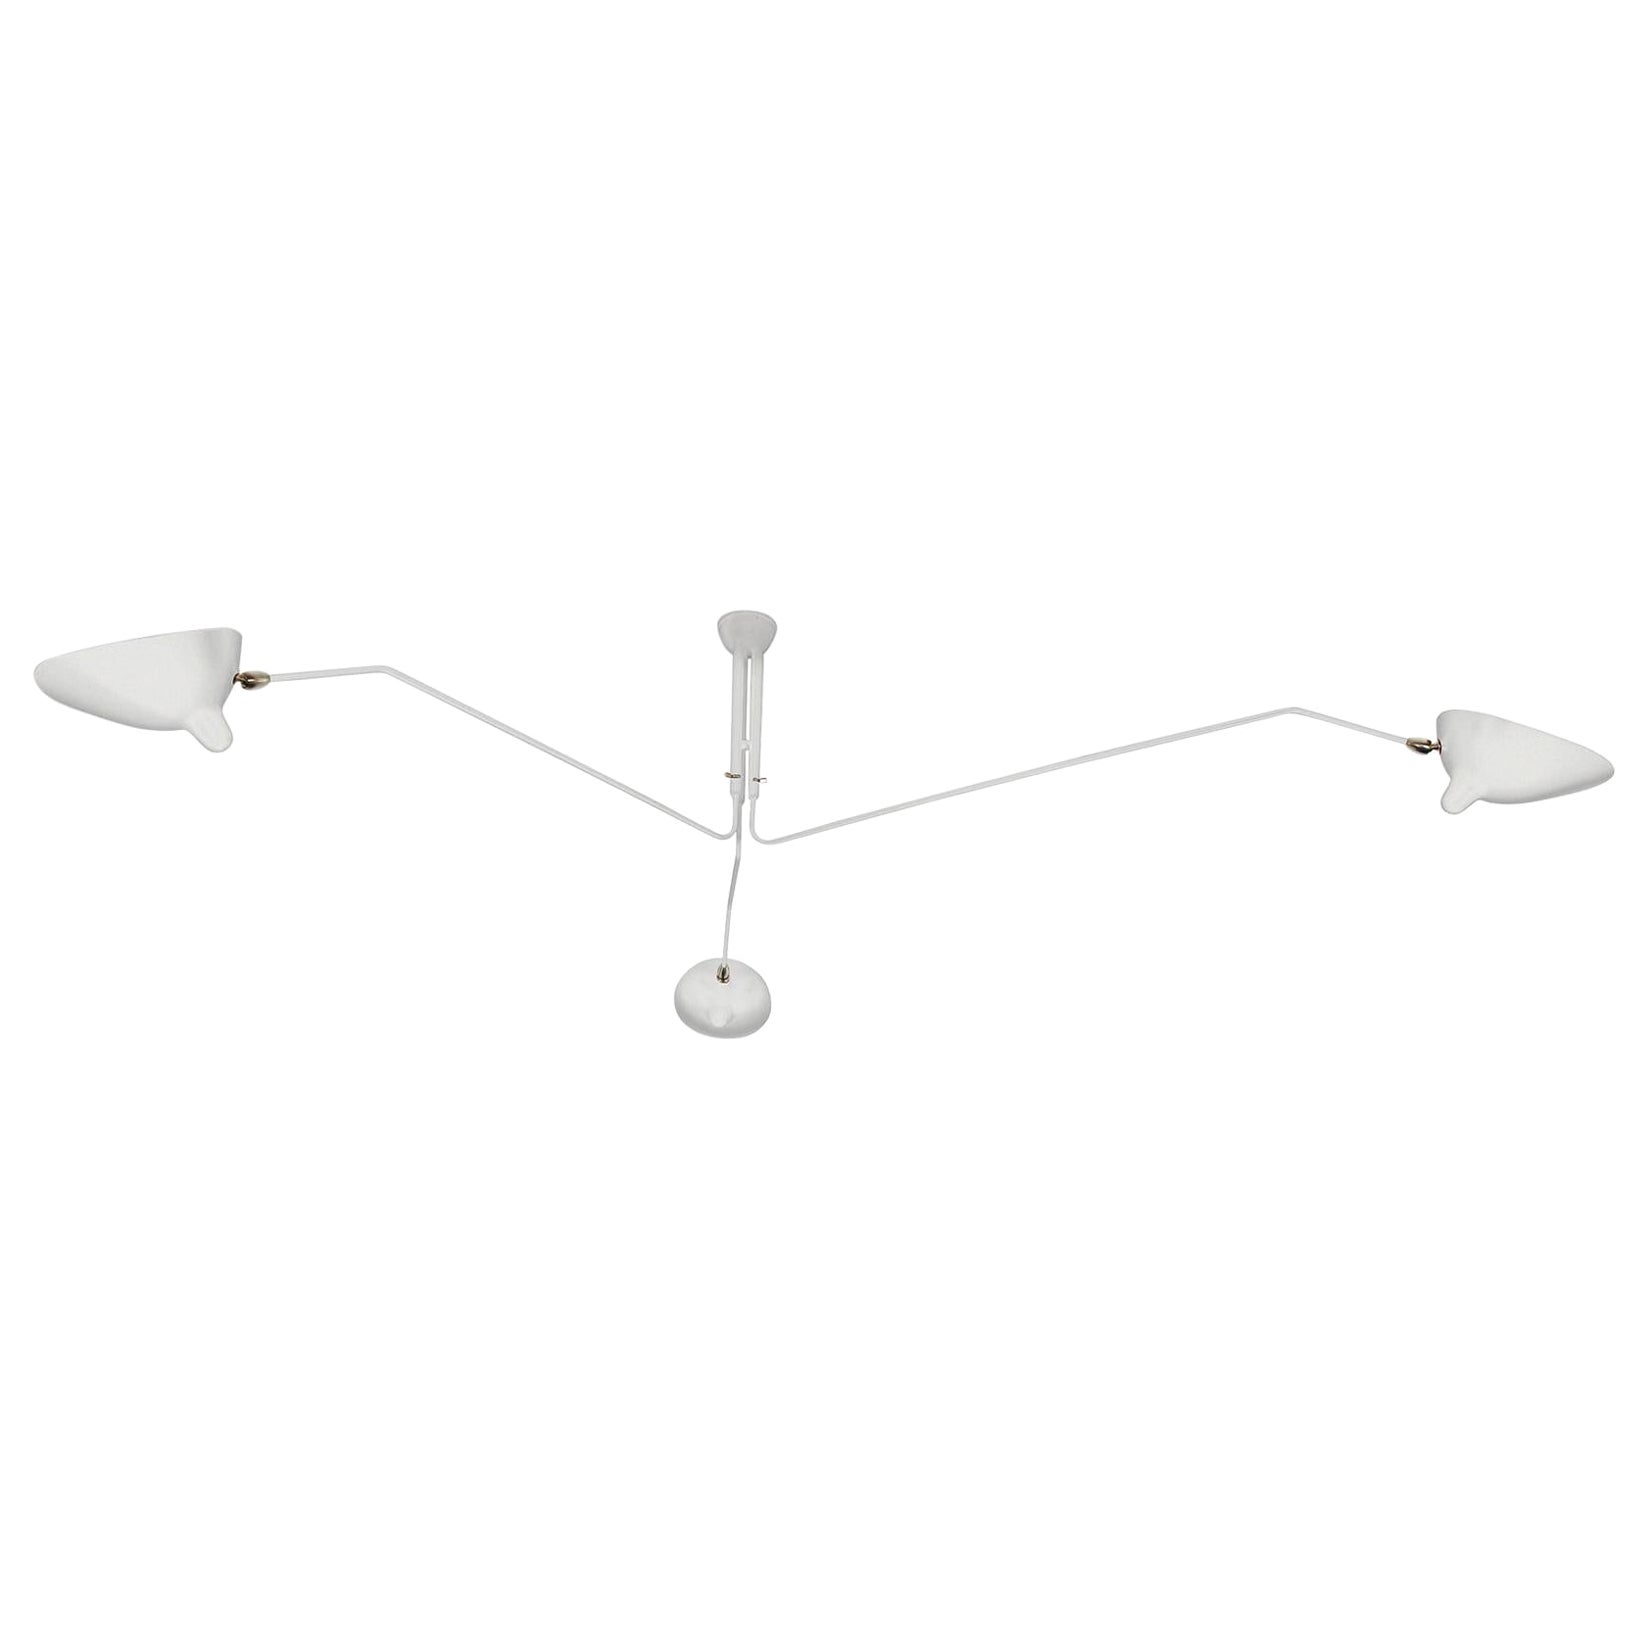 Serge Mouille Mid-Century Modern White Three Rotating Arms Ceiling Lamp For Sale